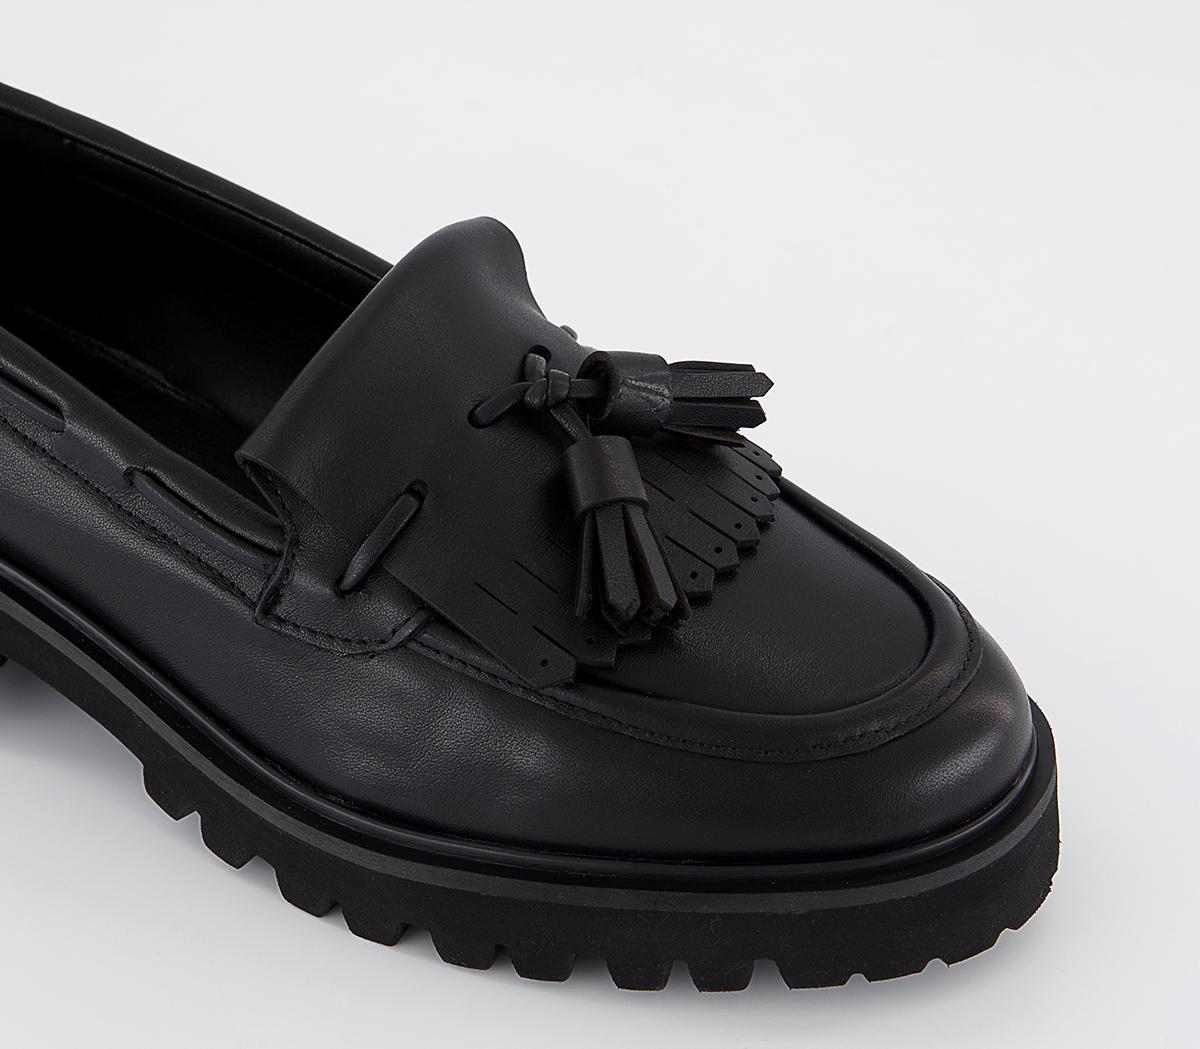 OFFICE Freya Fringe Loafers Black Leather - Flat Shoes for Women